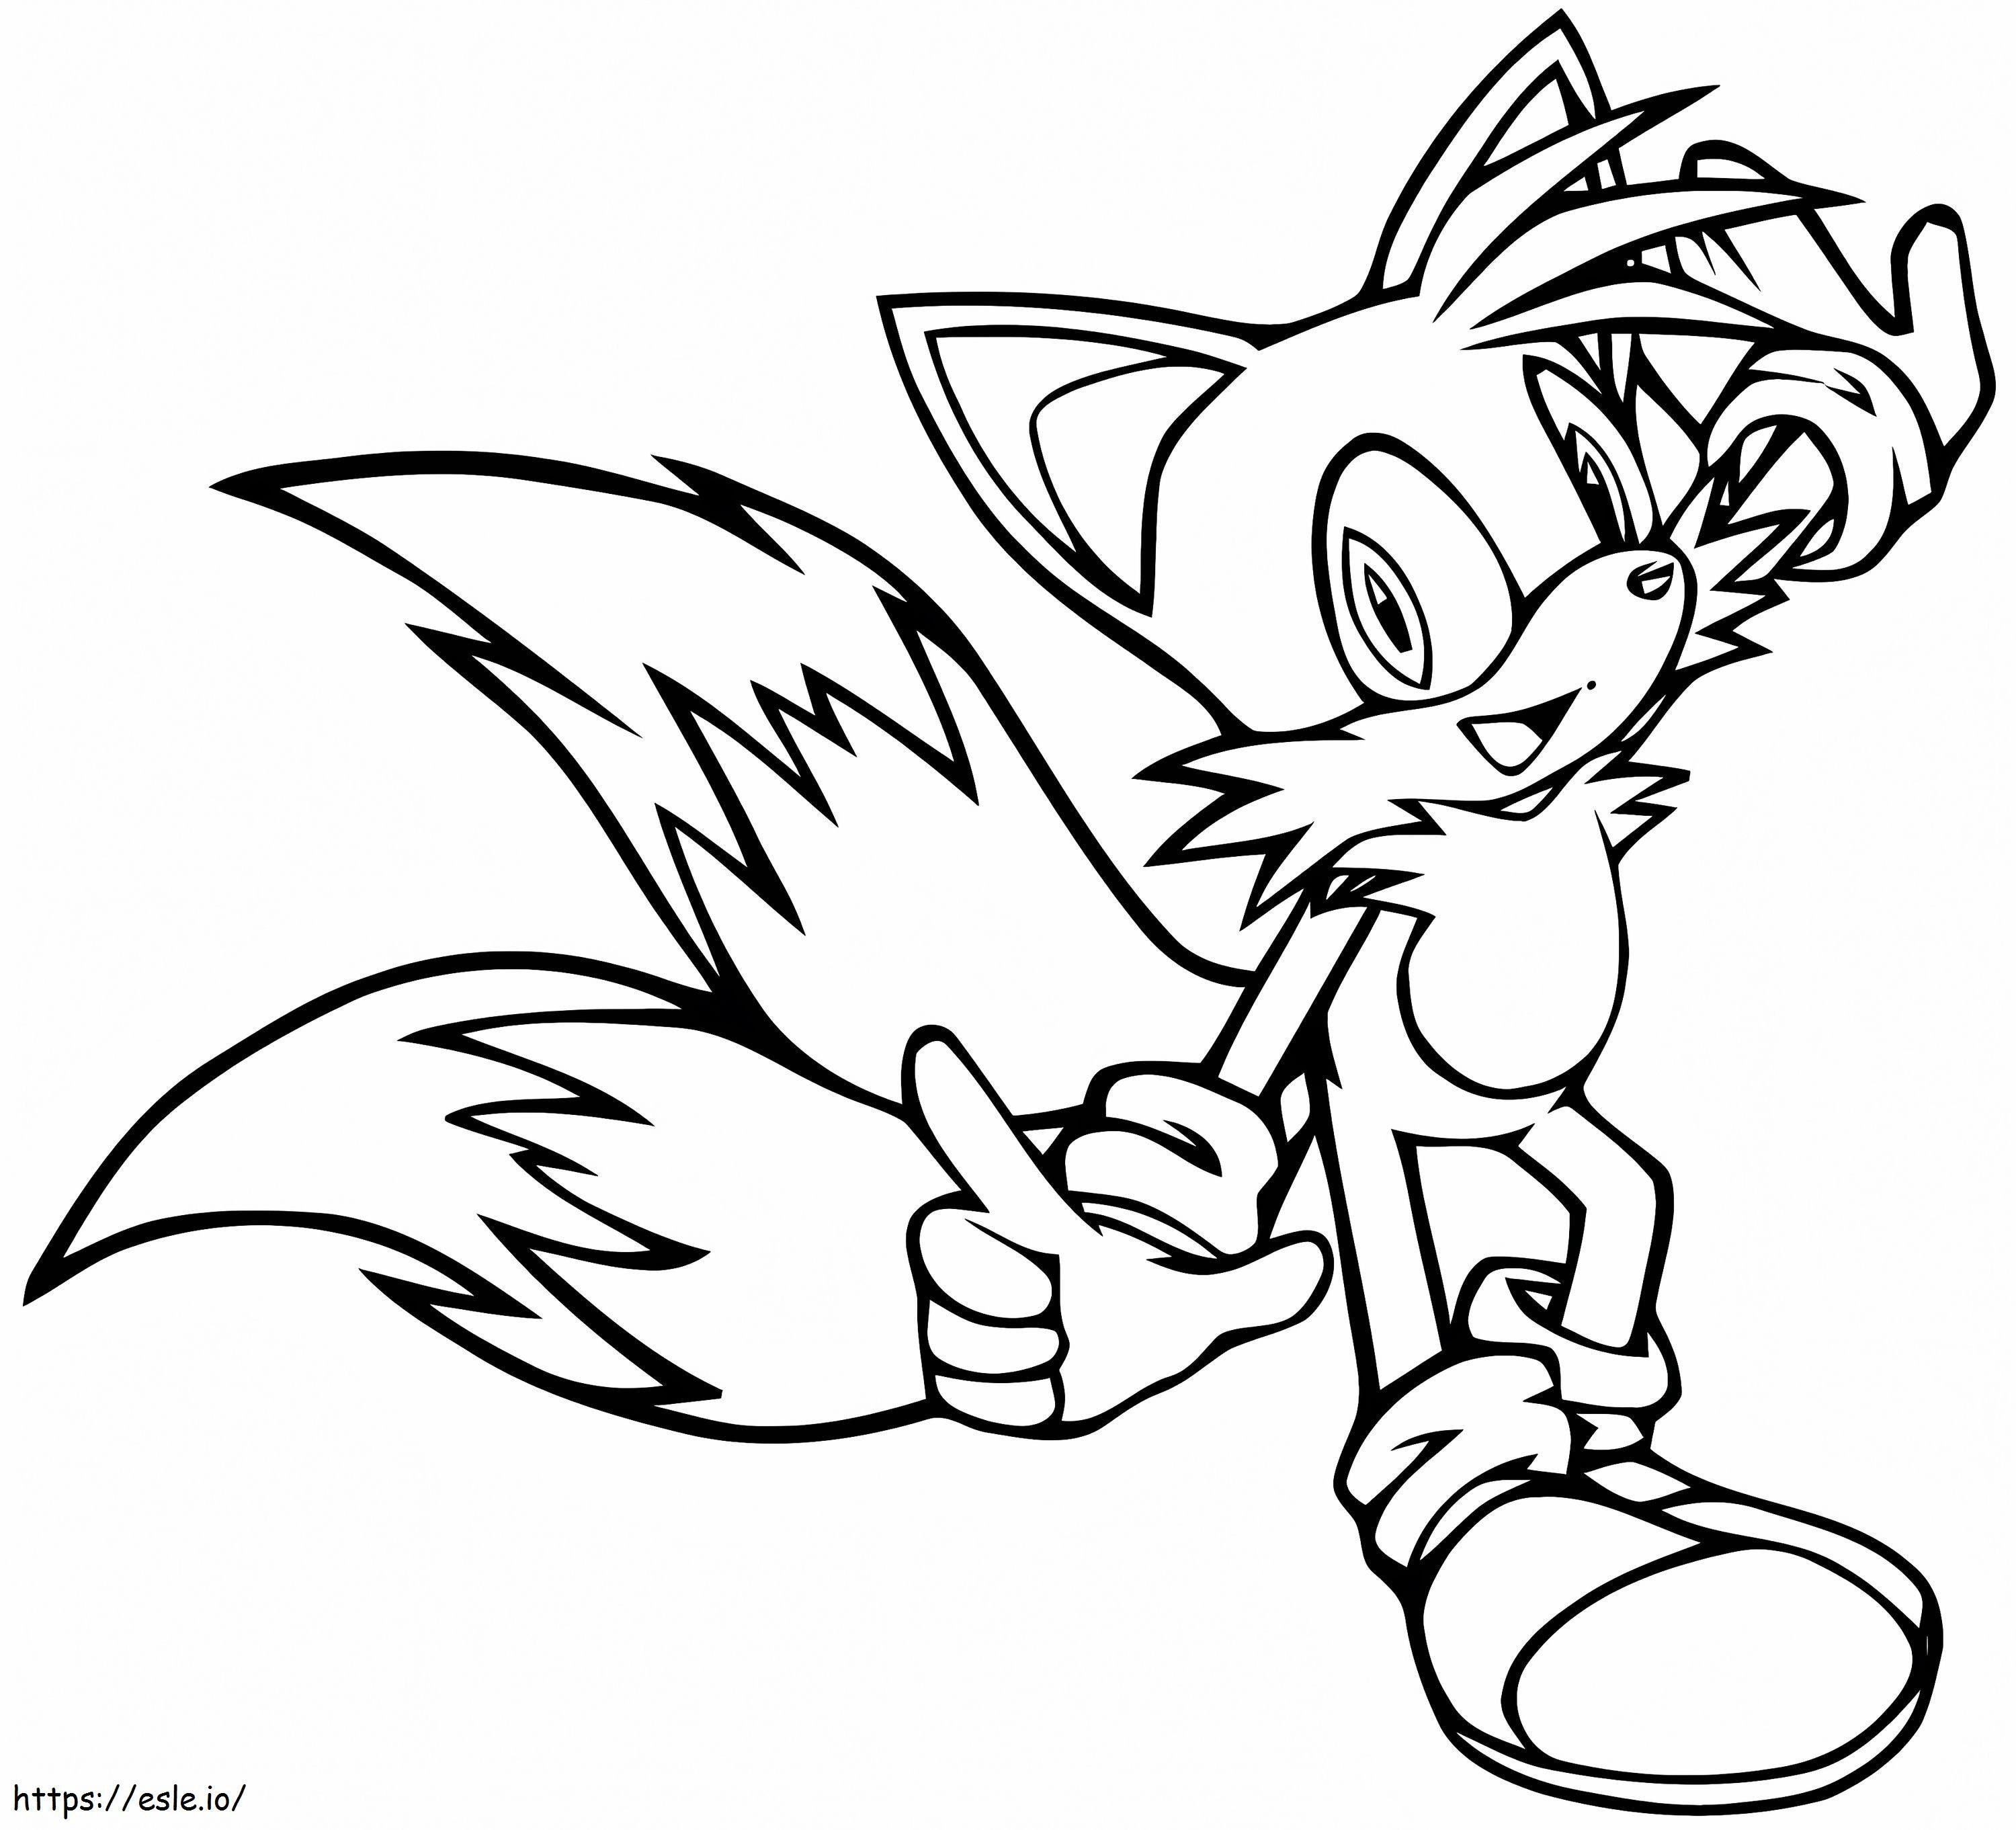 1532139646 Happy Tails A4 coloring page